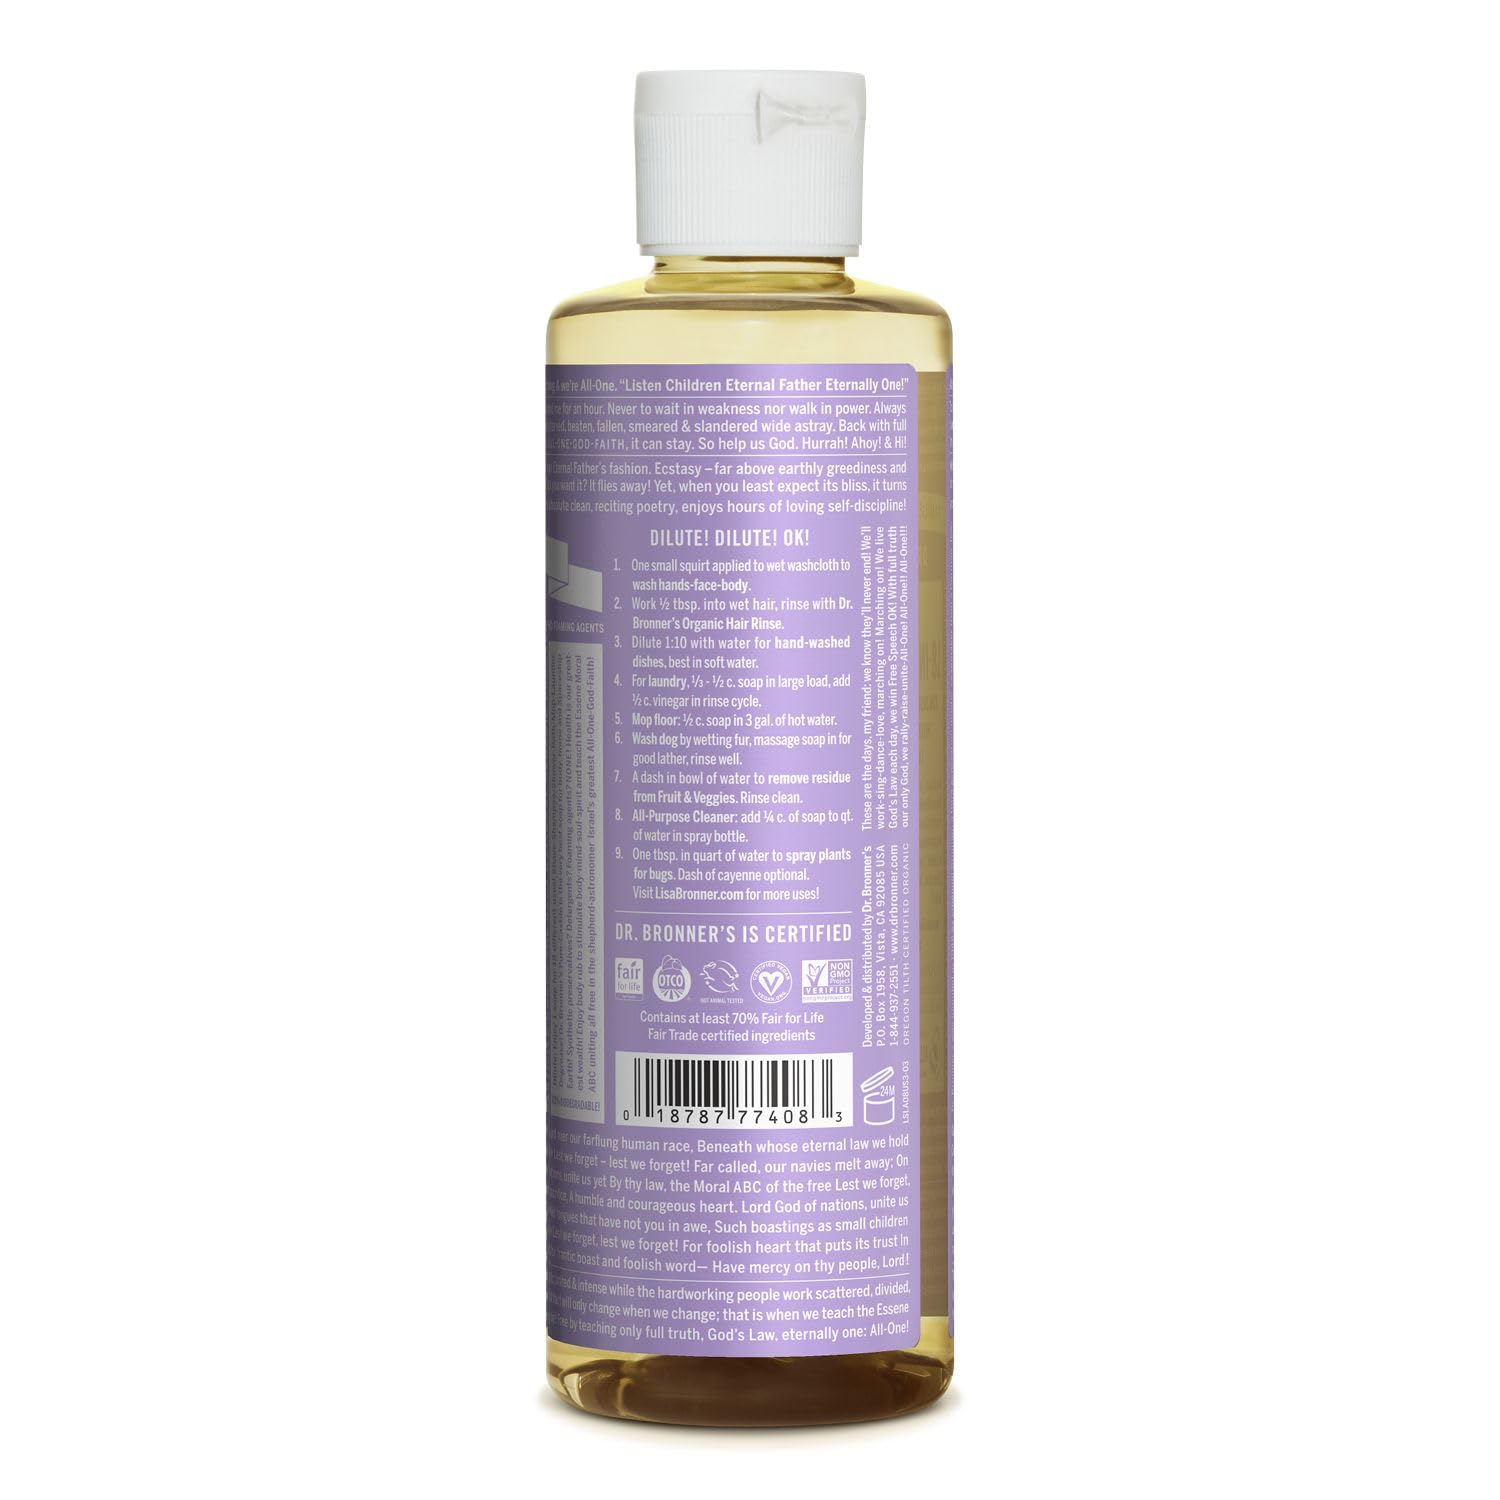 Dr. Bronner's - Pure-Castile Liquid Soap (Lavender, 8 ounce) - Made with Organic Oils, 18-in-1 Uses: Face, Body, Hair, Laundry, Pets and Dishes, Concentrated, Vegan, Non-GMO - Premium  from Concordia Style Boutique - Just $12.28! Shop now at Concordia Style Boutique